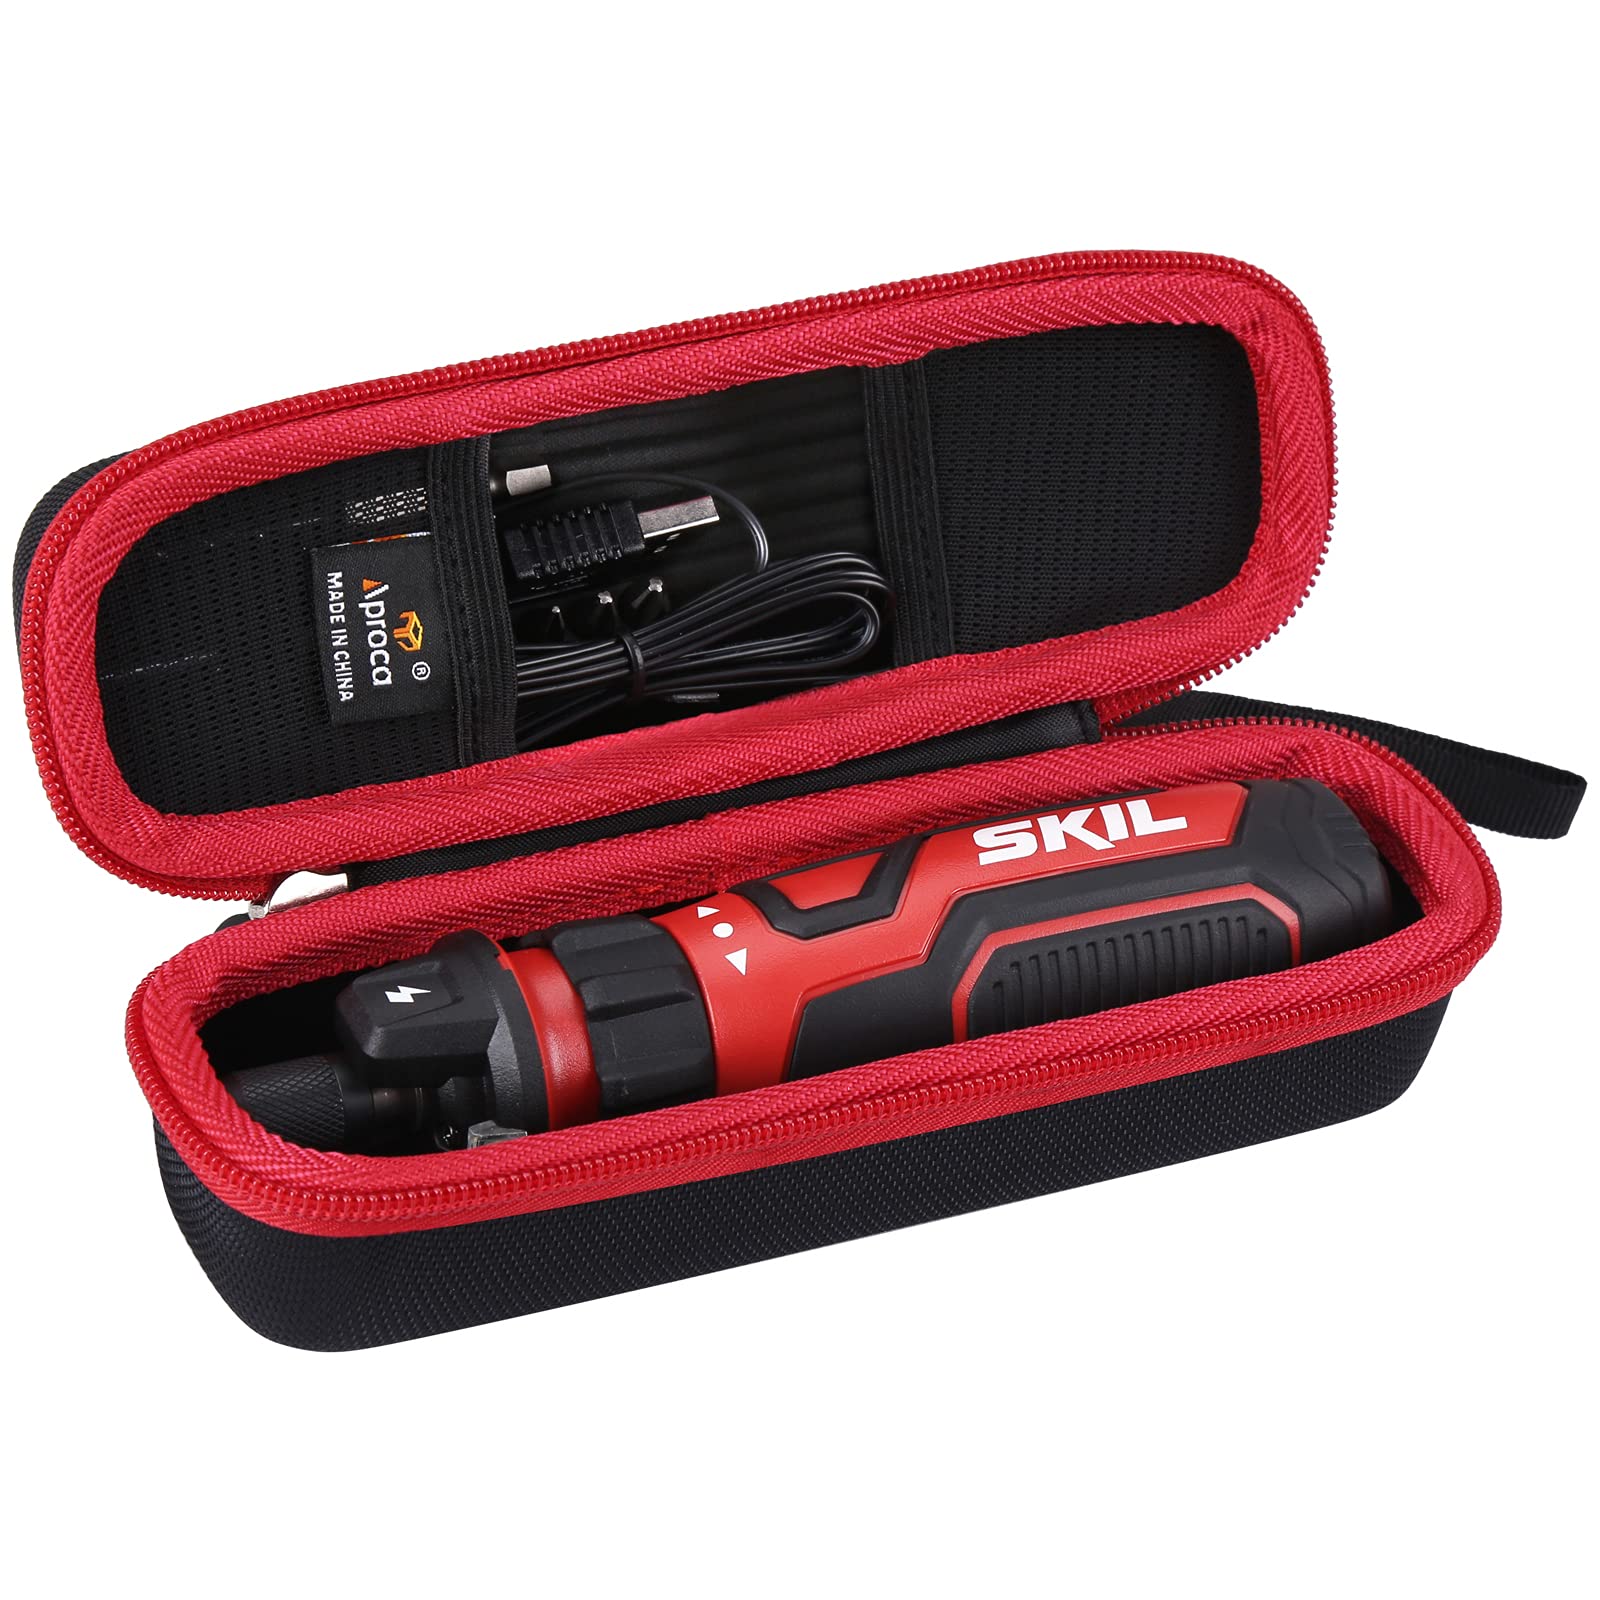 Aproca Hard Storage Travel Case, for SKIL Rechargeable 4V Cordless Screwdriver and Accessories